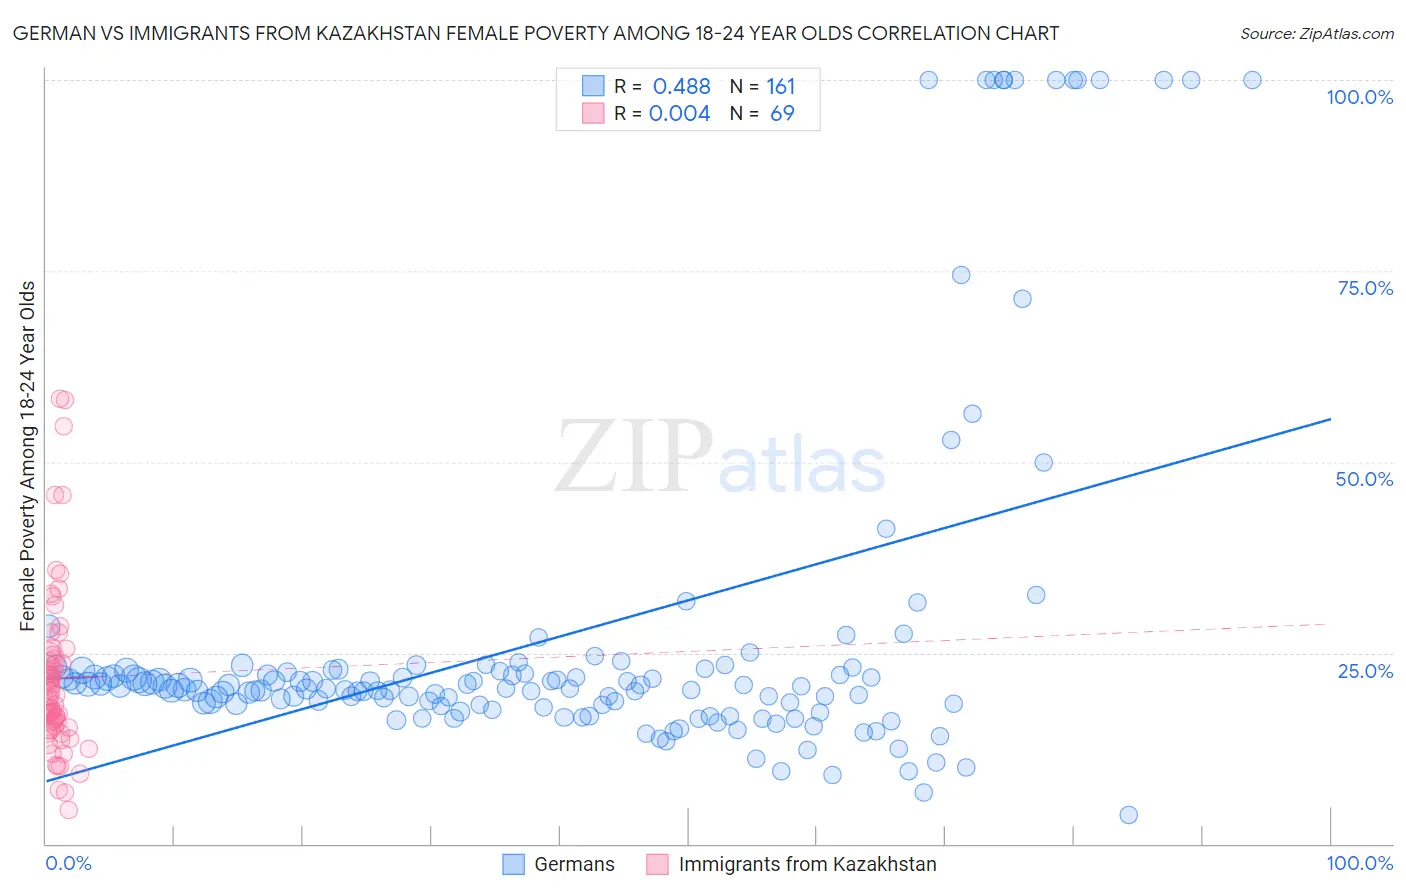 German vs Immigrants from Kazakhstan Female Poverty Among 18-24 Year Olds